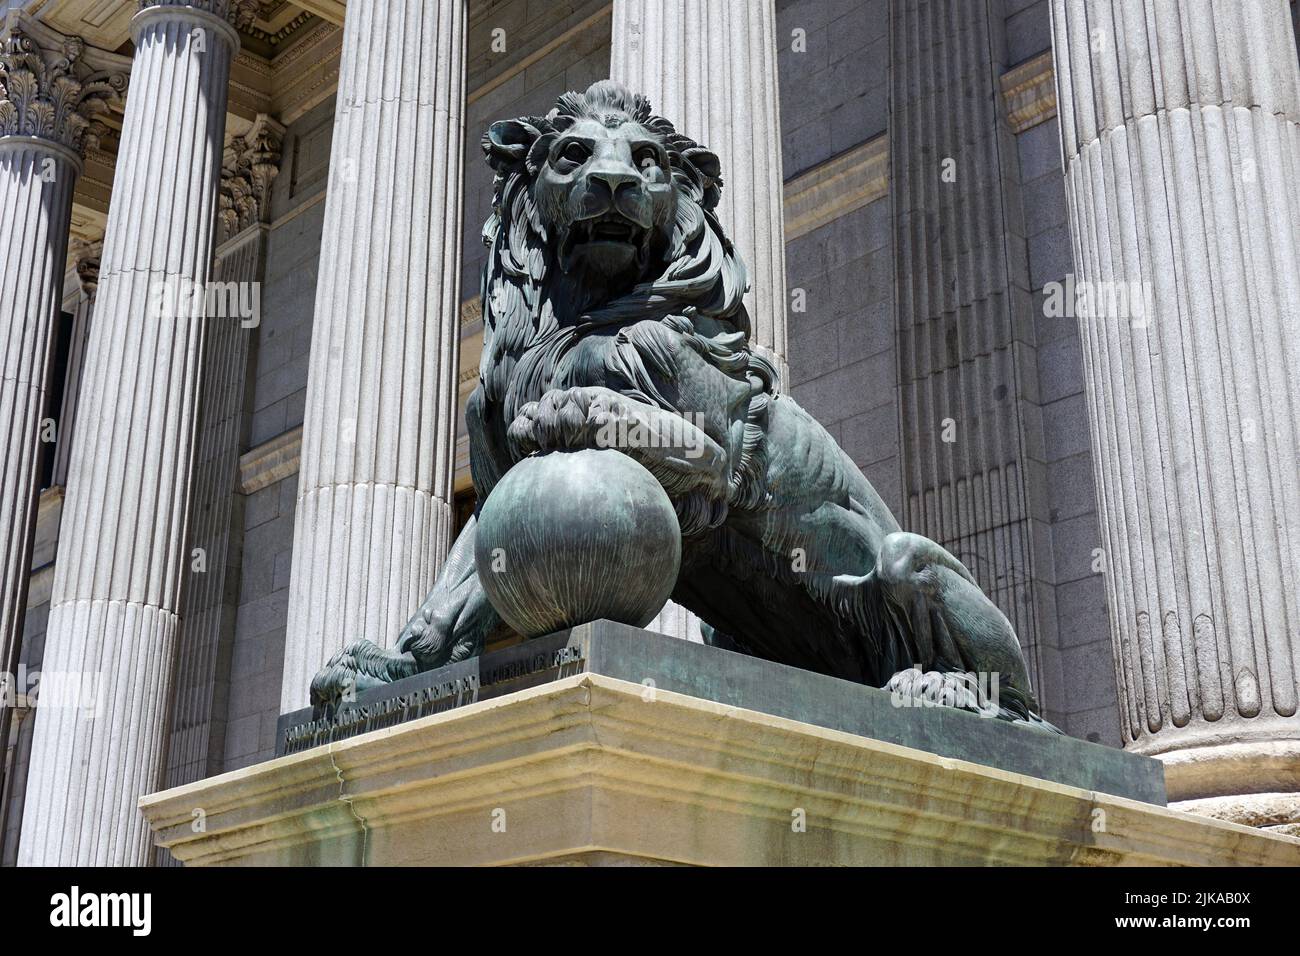 The Lions of The Congress of Deputies or Congreso de los Diputados,at the Plaza de las Cortes,the lower house of the Spanish Parliament.Madrid Spain.(made by Ponciano Ponzano y Gascón (1813 – 1877) a sculptor.) Stock Photo